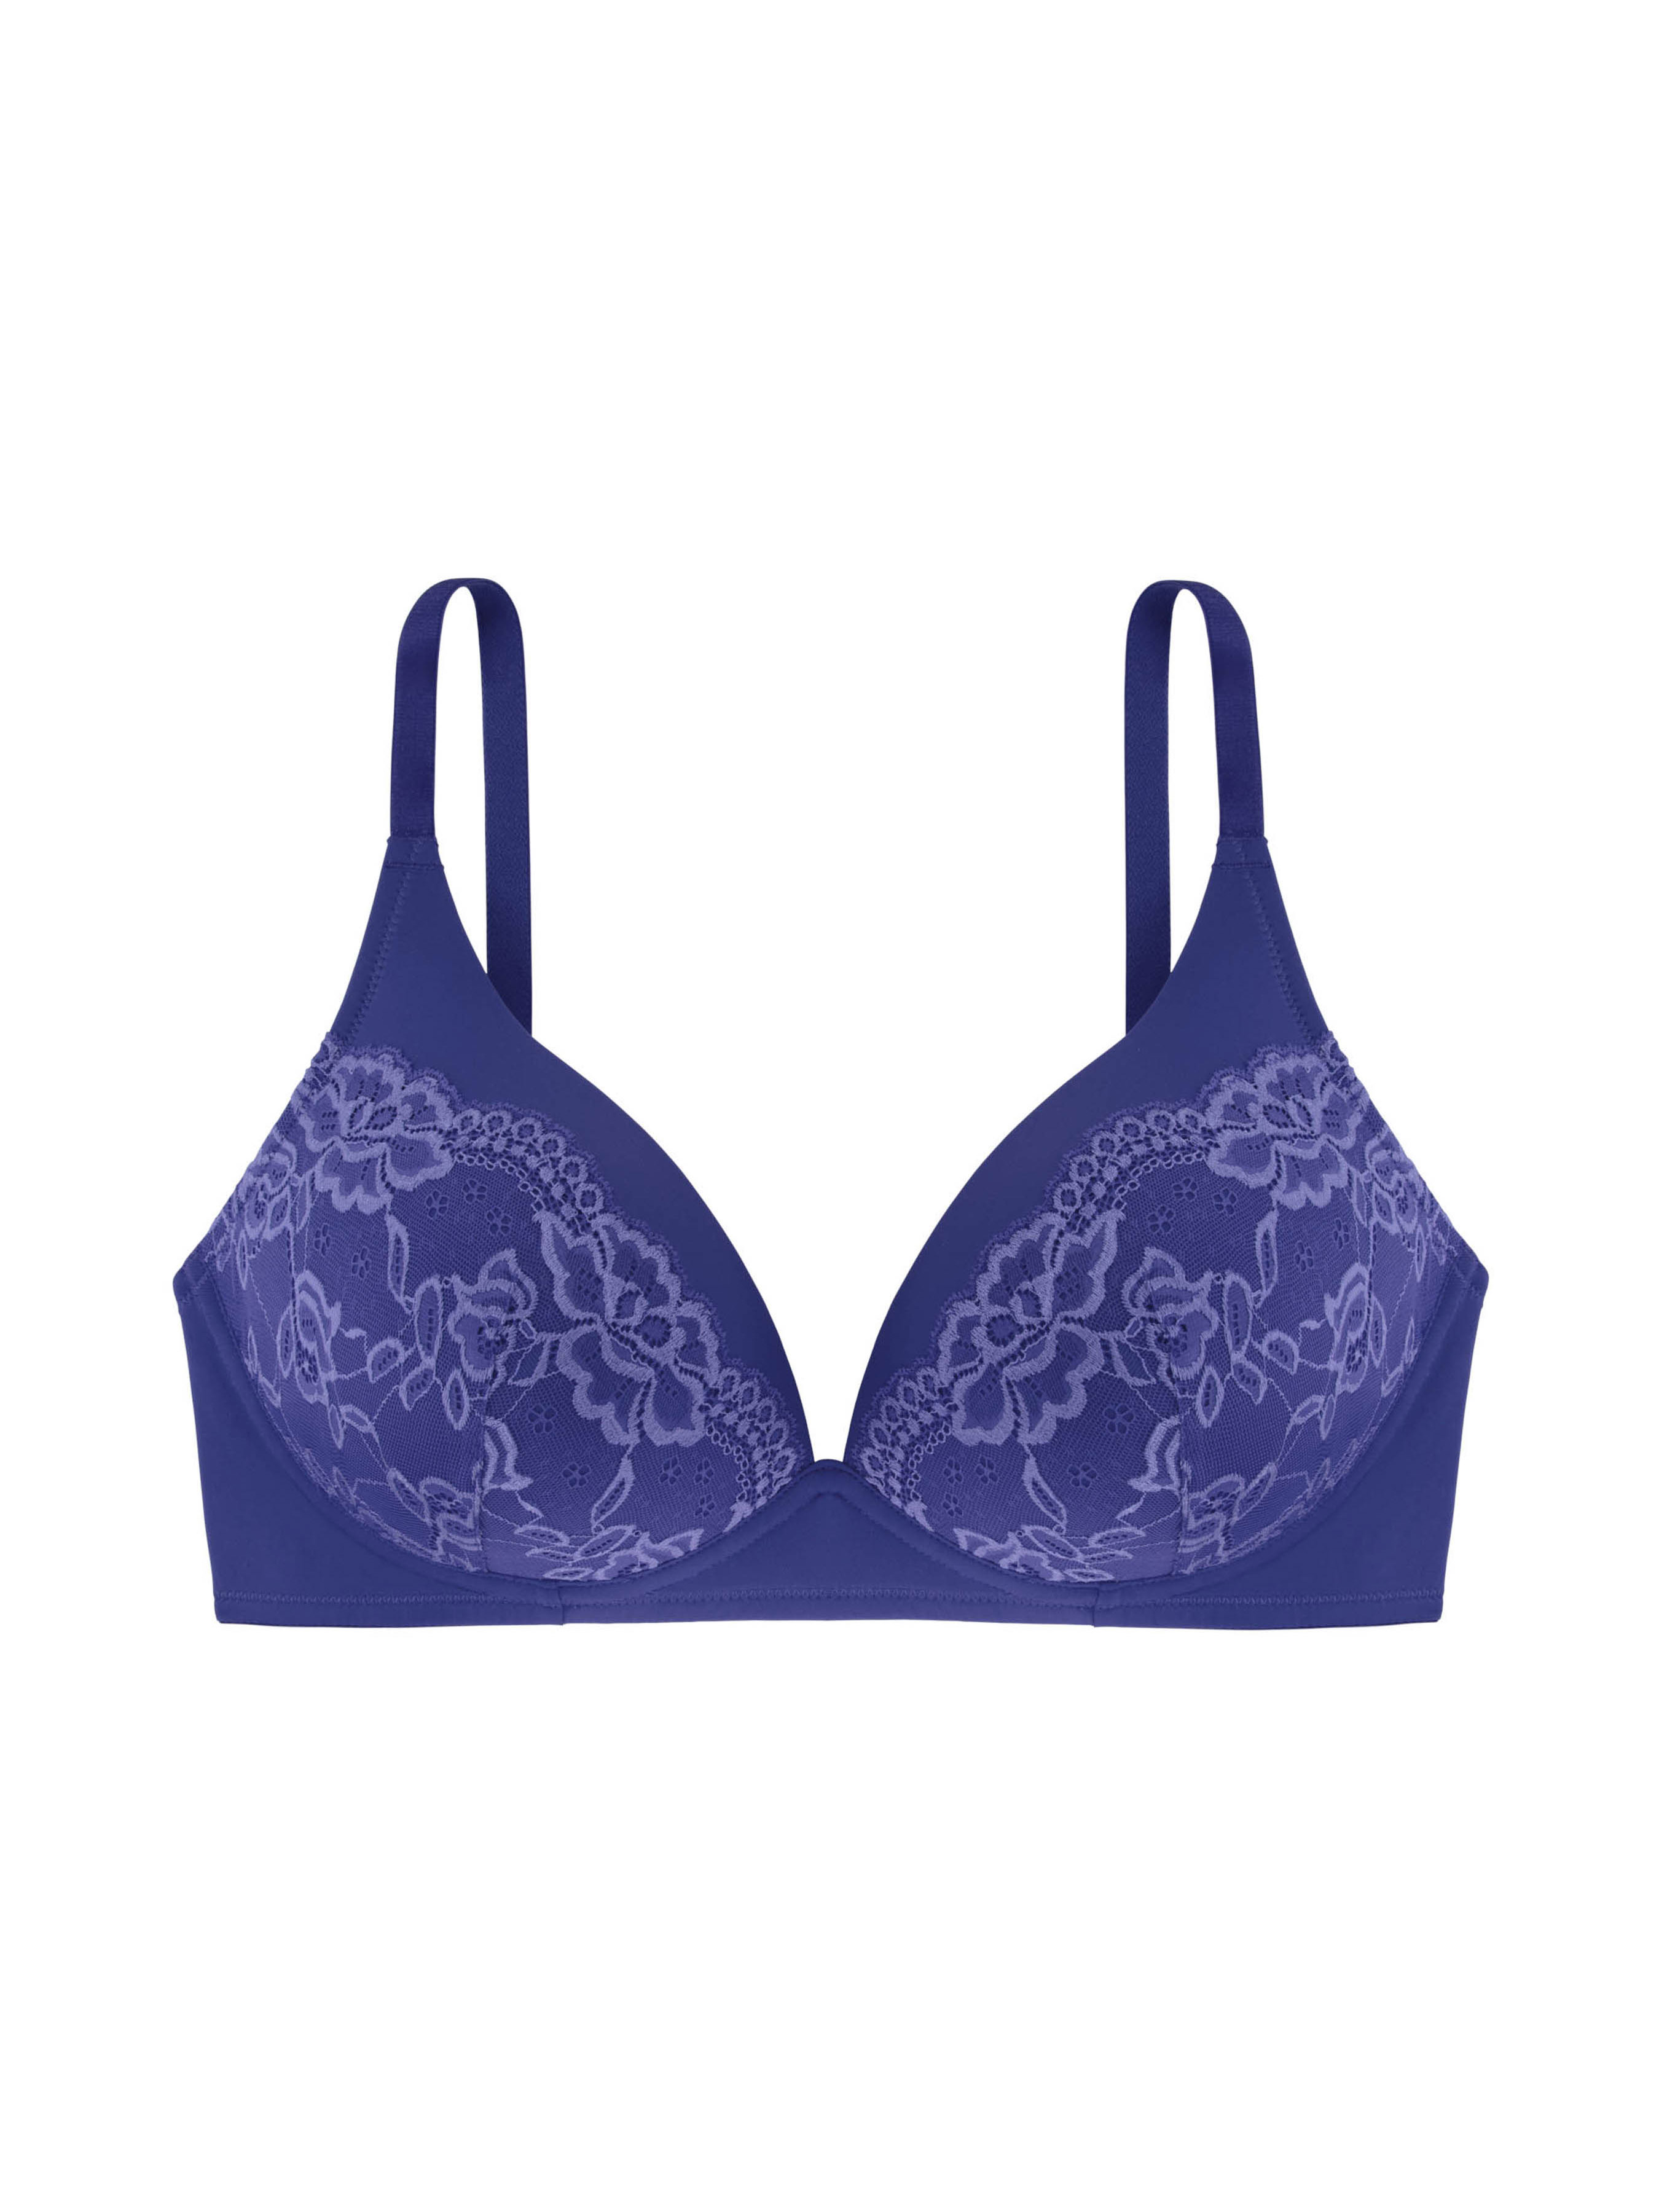 Buy Lenriza Light Padded Full Coverage Non Wired Cotton Bra and